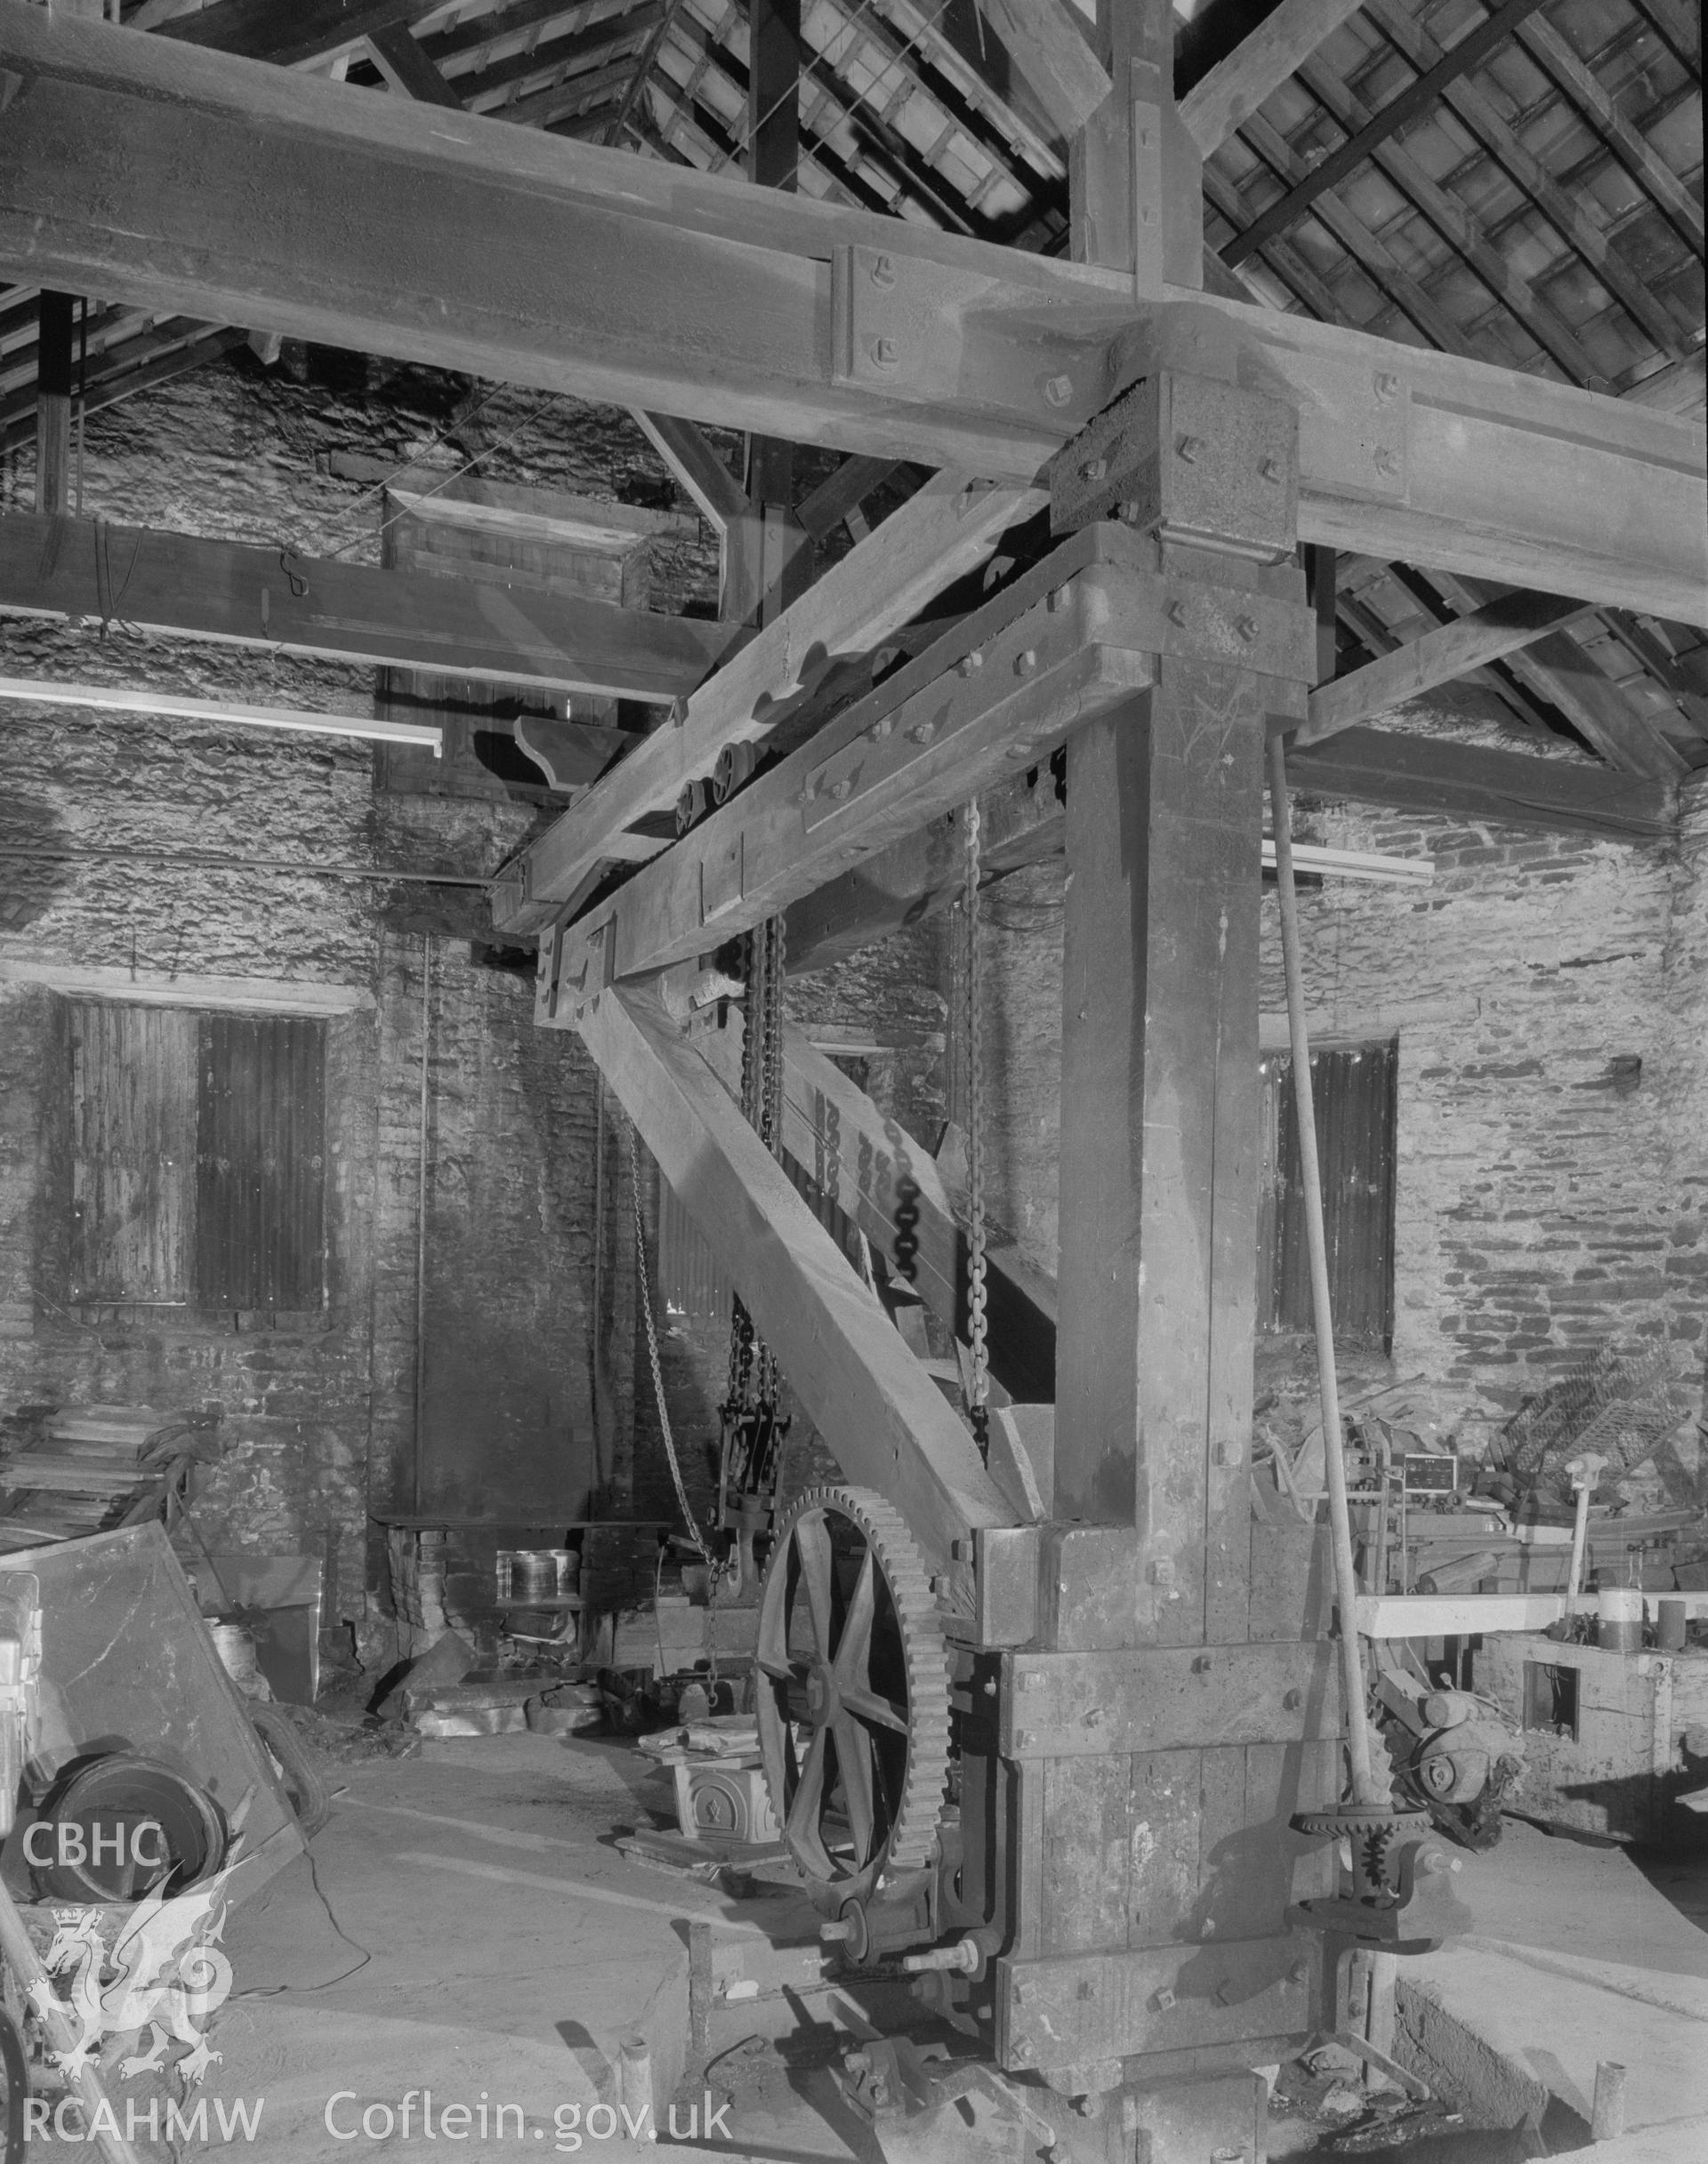 Digital copy of a black and white negative showing detail of the crane at Player's Works Foundry, Clydach, taken by RCAHMW, undated.